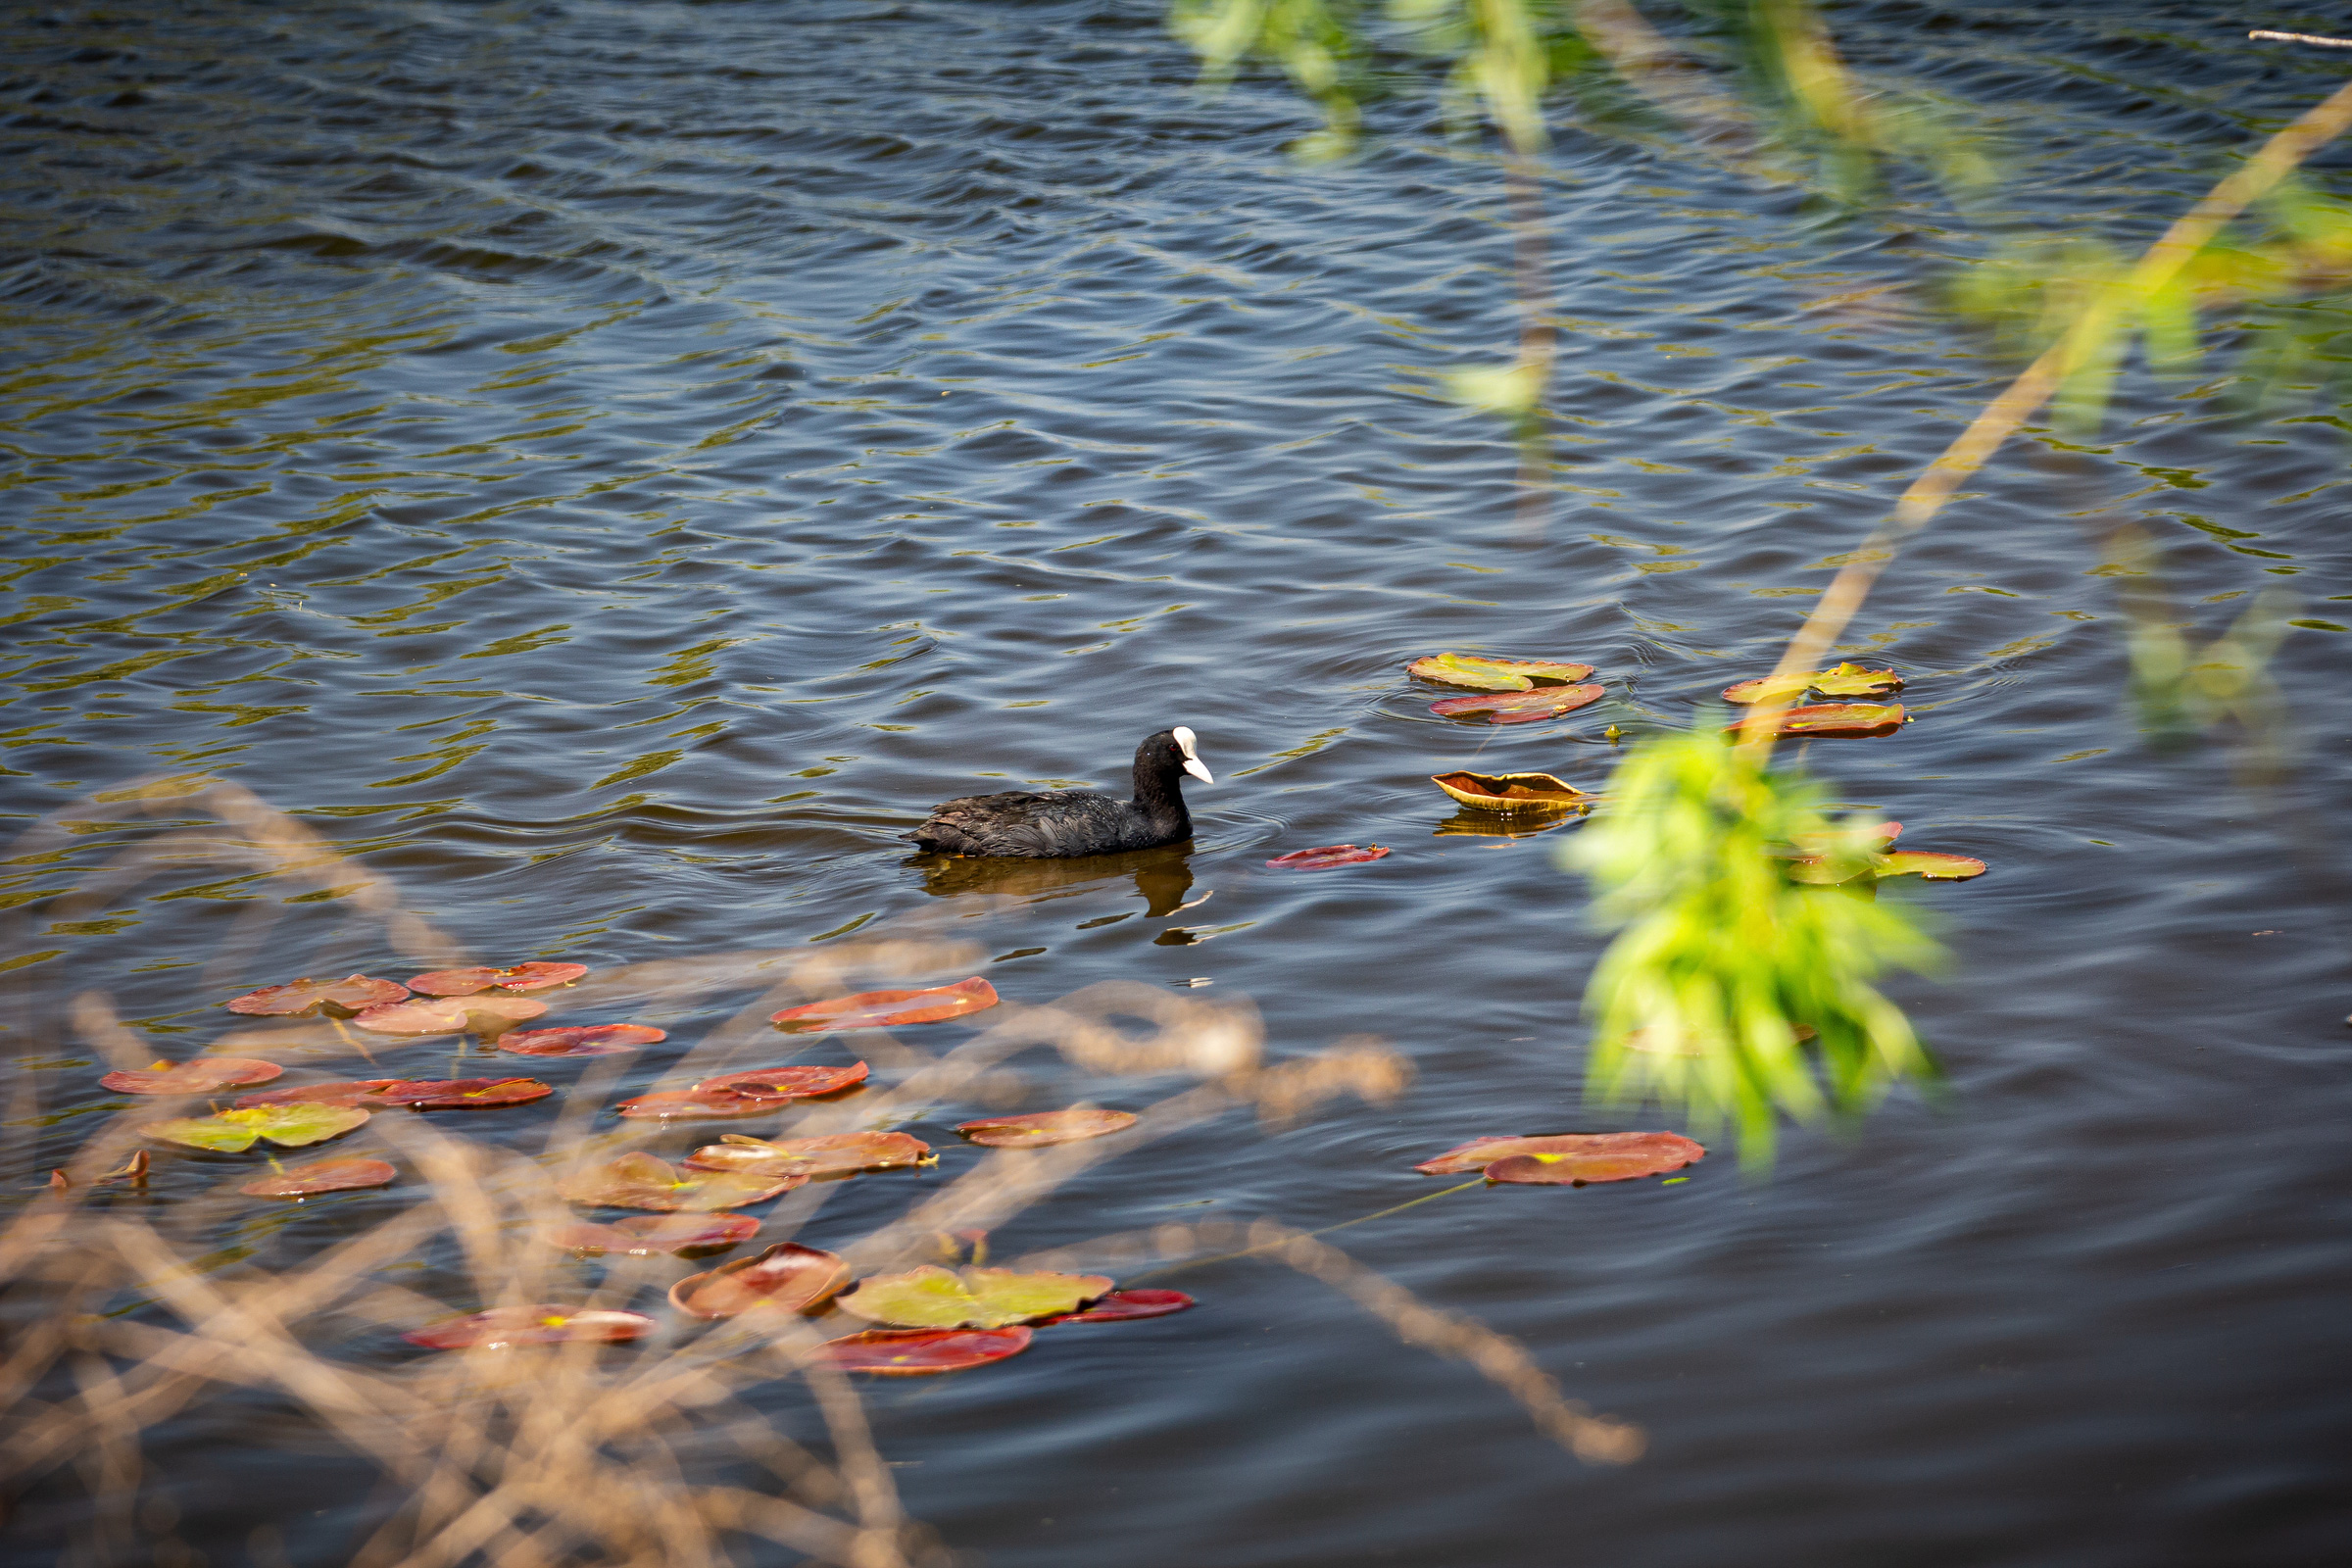 Coot in a small lake